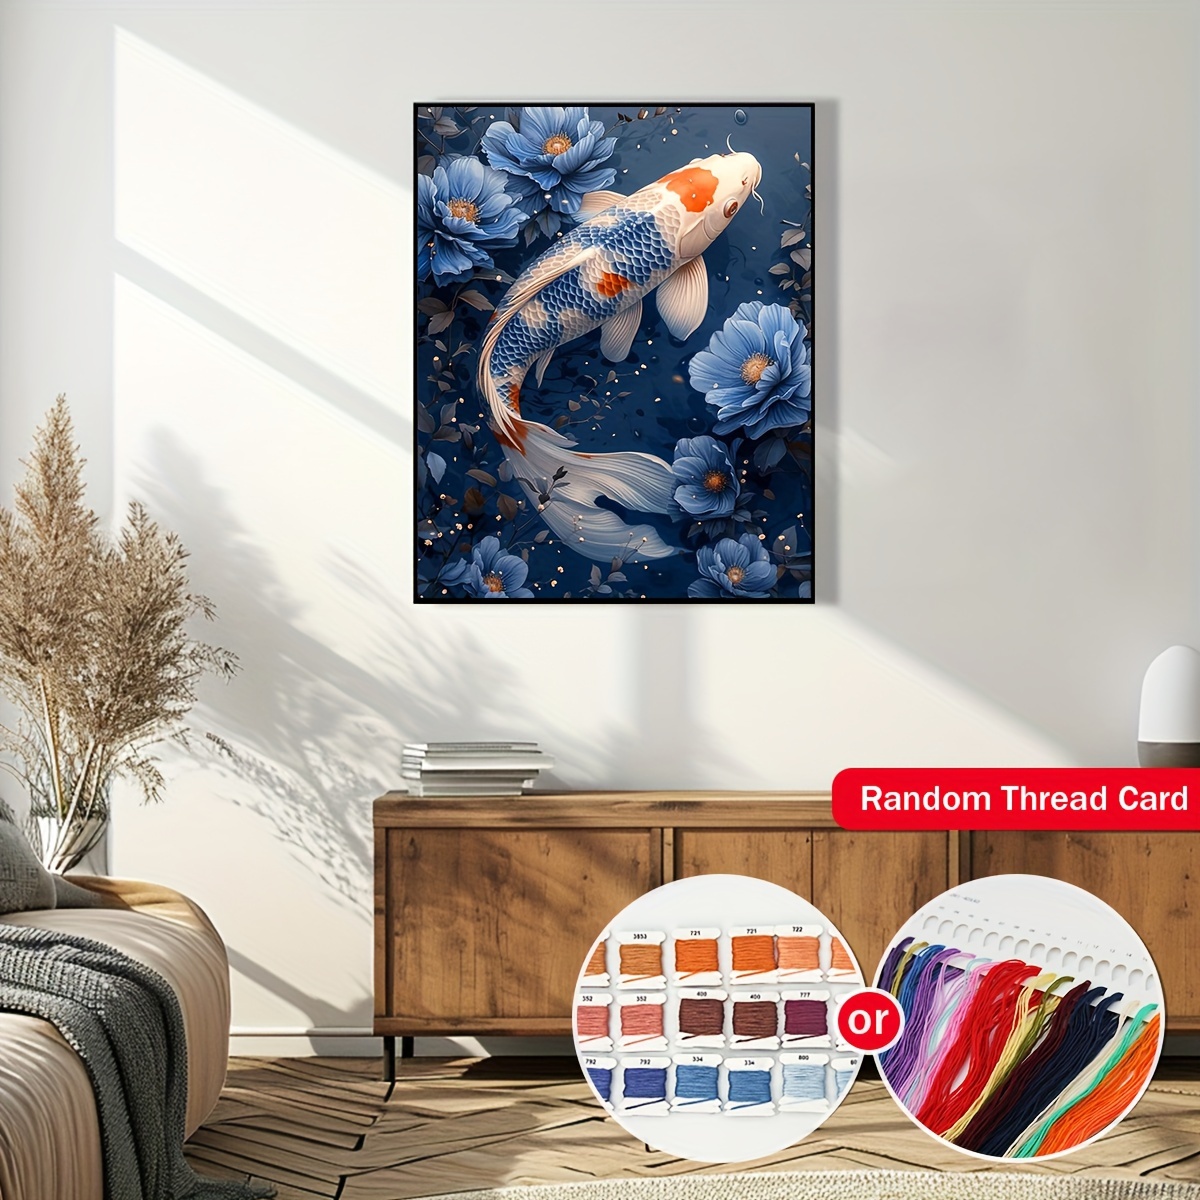 

Koi Fish Pattern Diy Cross Stitch Kit 15.7x19.7" - Complete Embroidery Set With Mixed Colors, Ideal For Living Room & Bedroom Decor, Craft Supplies Included